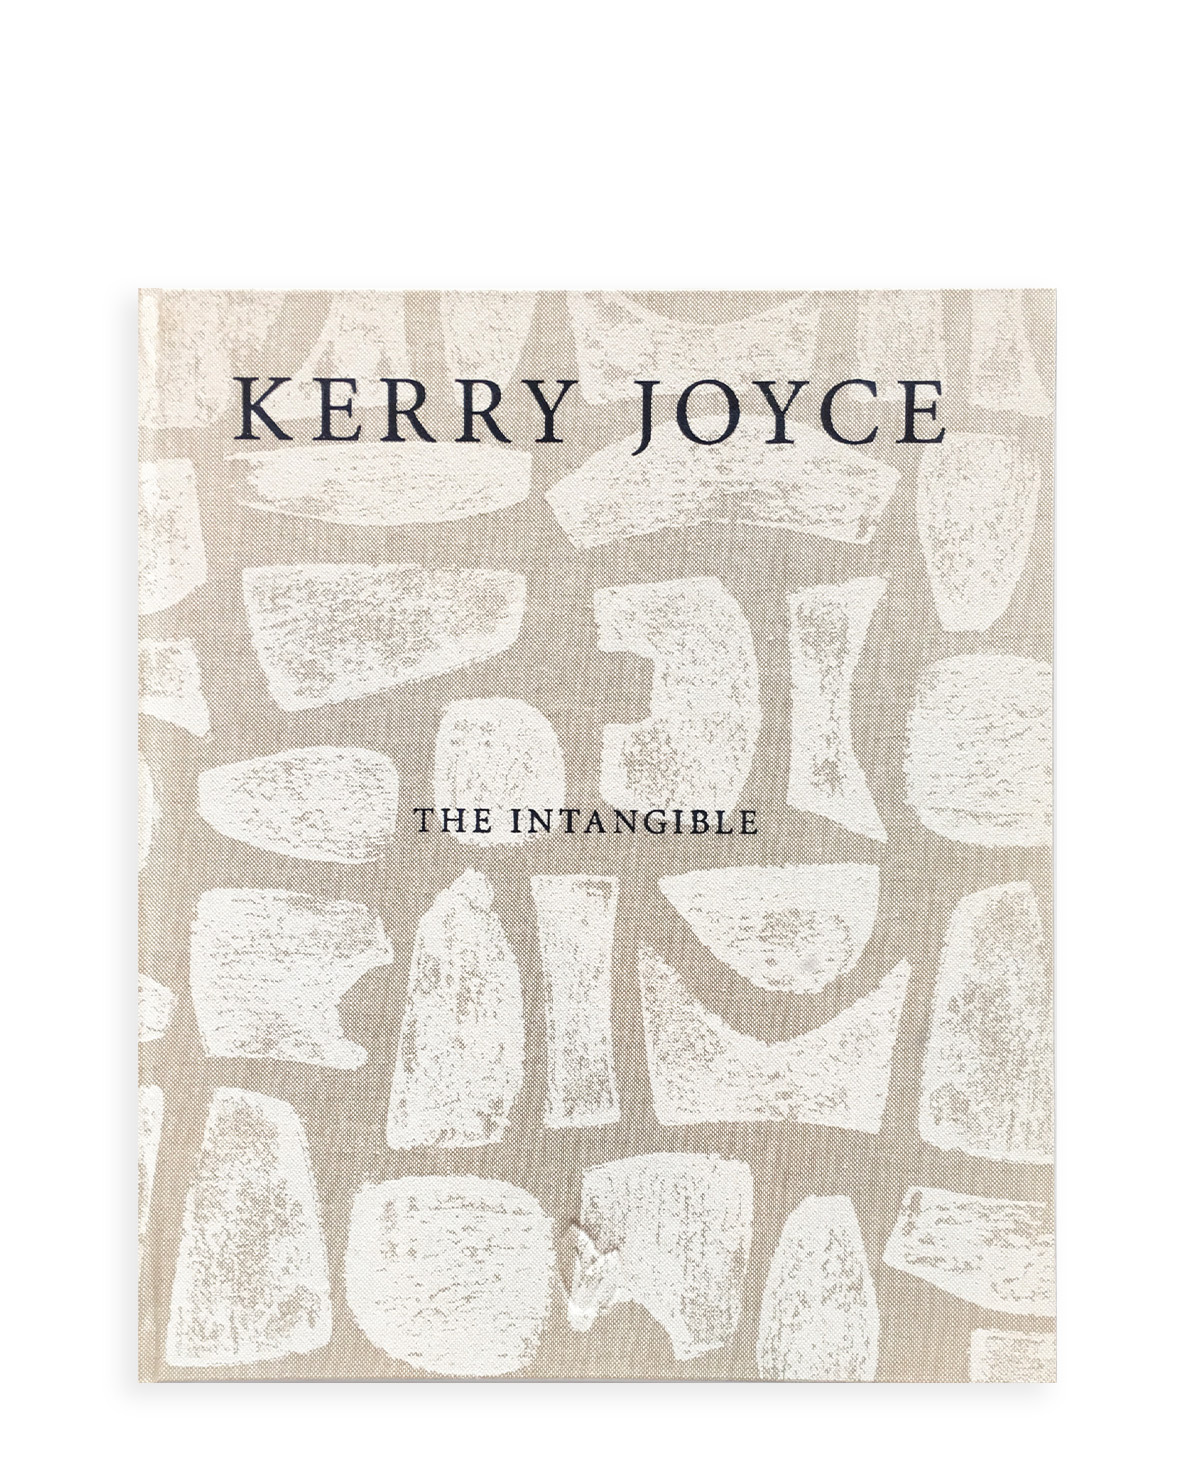 Buch Kerry Joyce: The Intangible